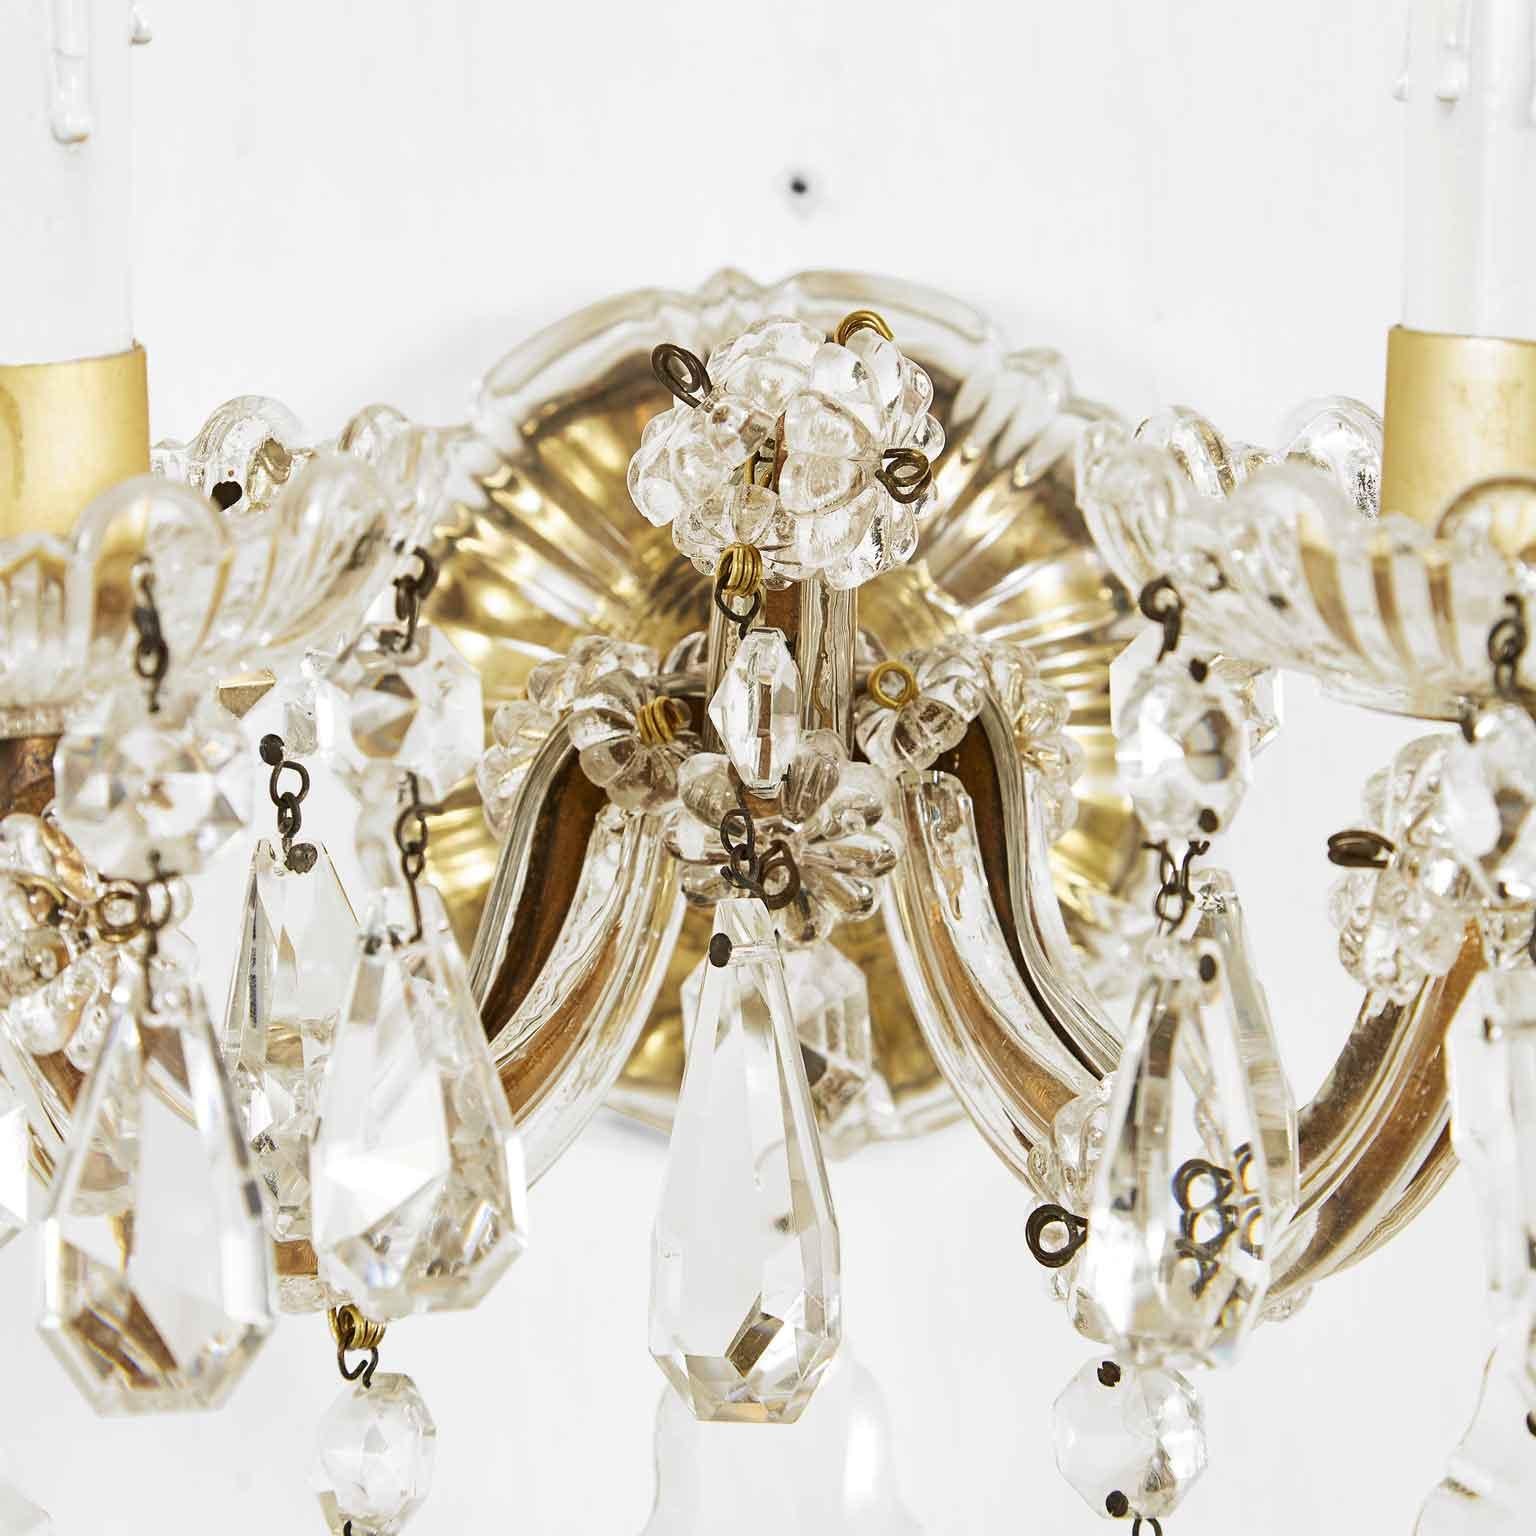 Faceted Pair of Italian Crystal Sconces 1950s Marie Therese Two-Armed Wall Lights